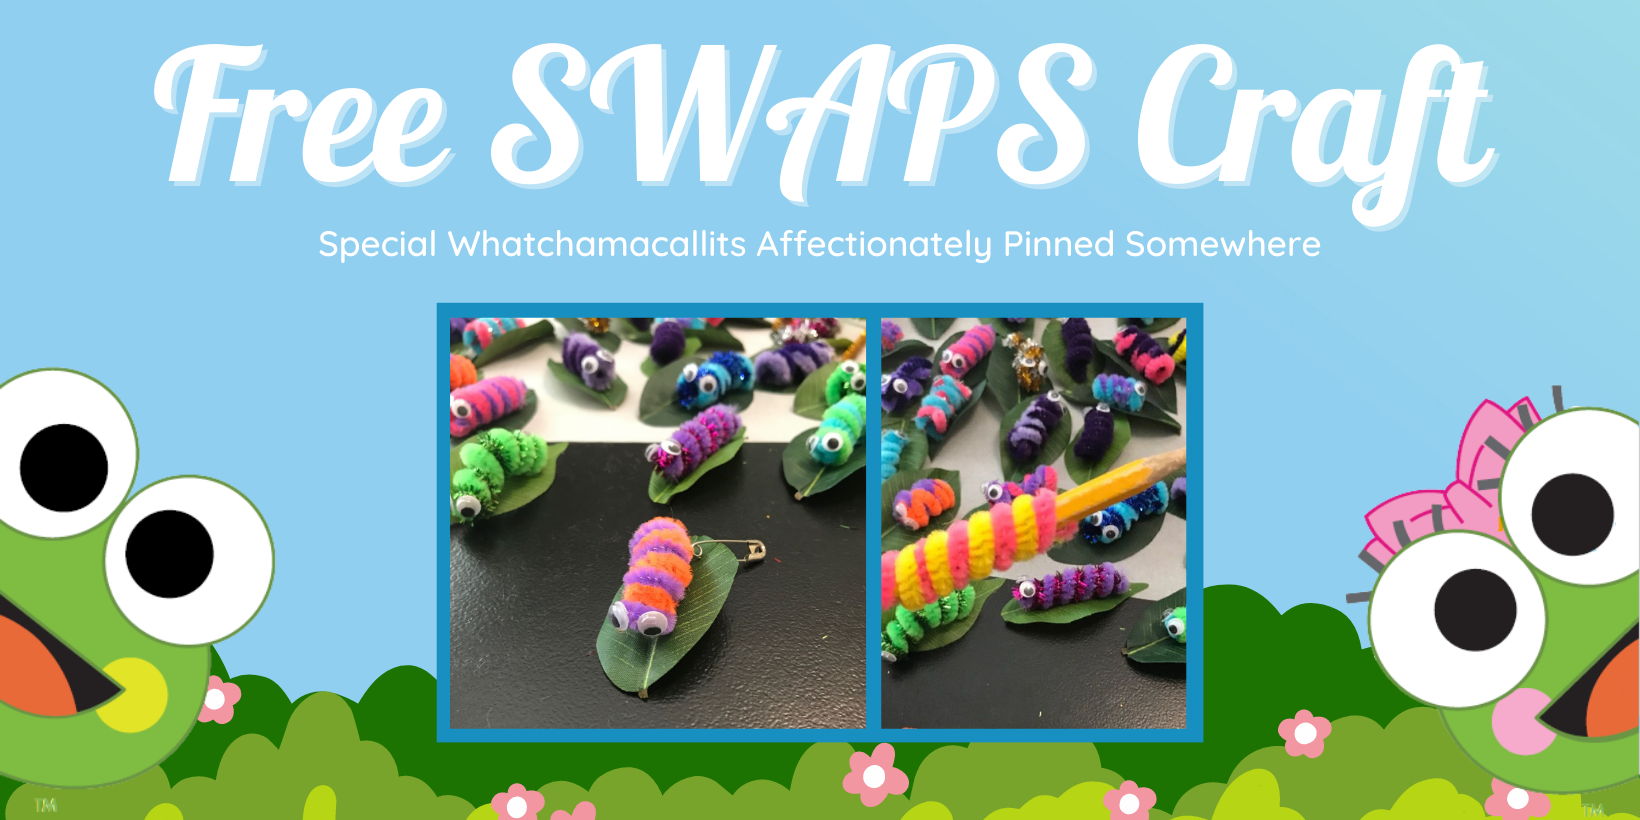 Free SWAPs craft at sweetFrog Catonsville promotional image